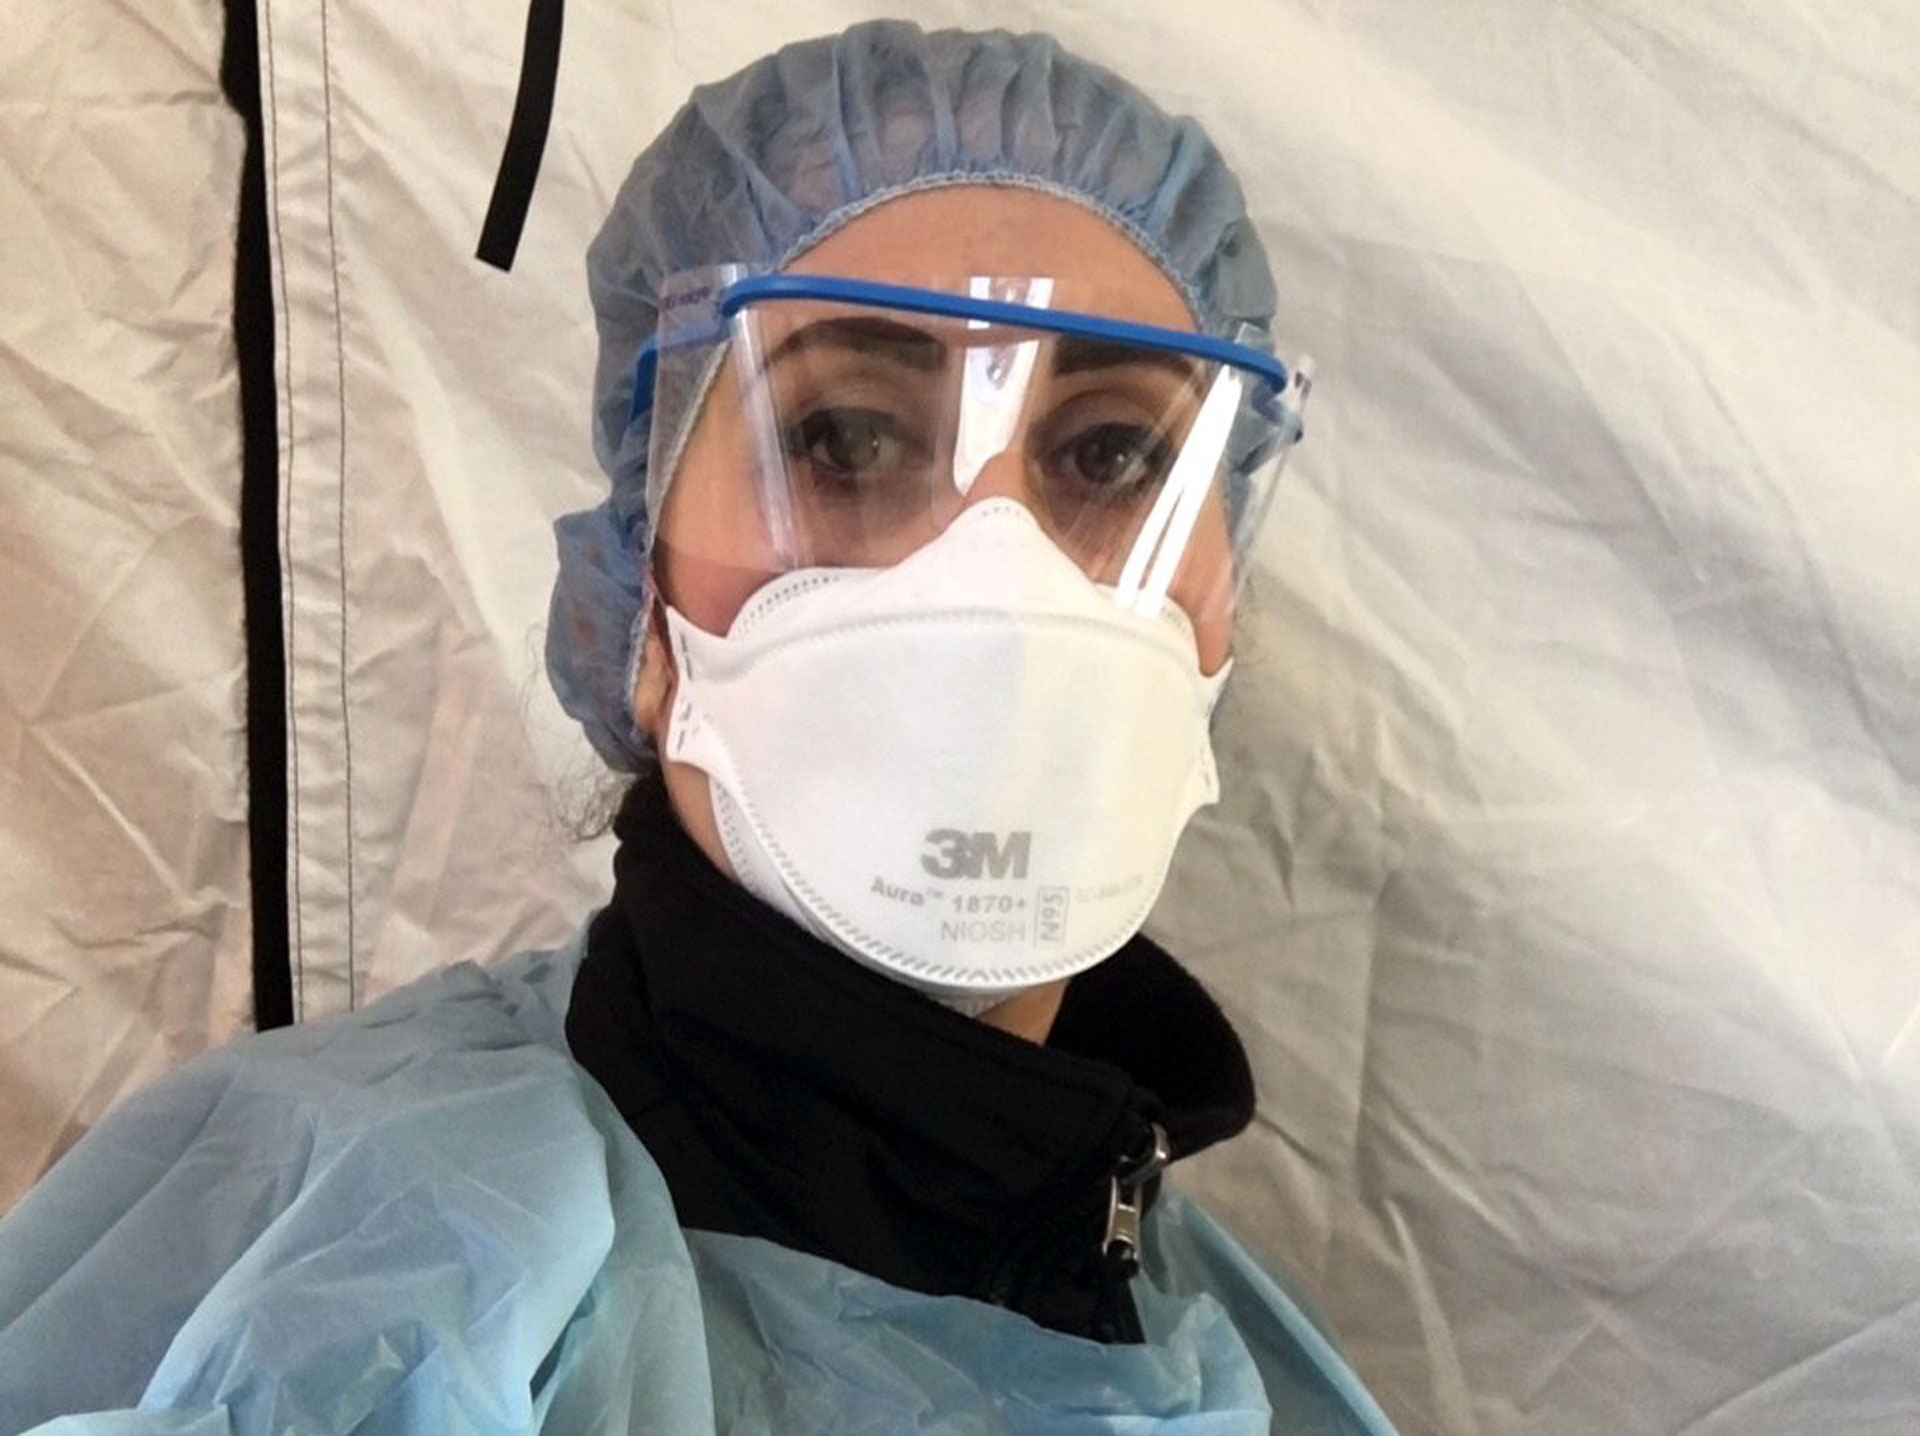 Ameneh Moghaddam dressed in PPE for work as a COVID-19 tester at the Contra Costa Regional Medical Center in Martinez.